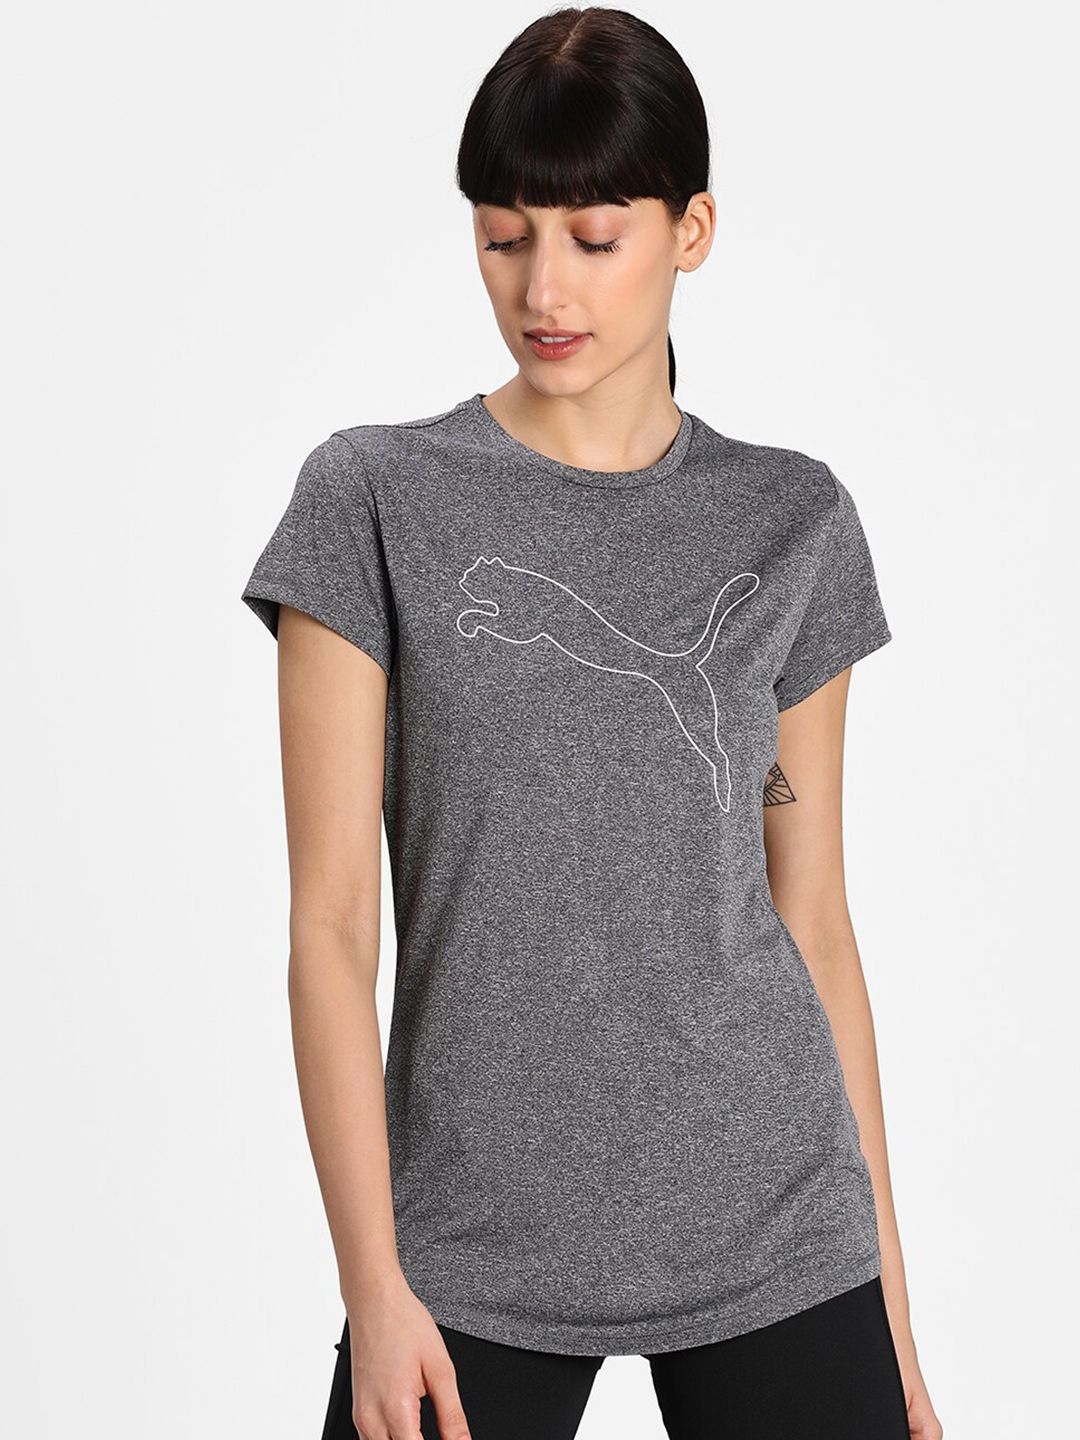 Puma Women Grey Brand Logo Printed dryCELL Training or Gym T-shirt Price in India